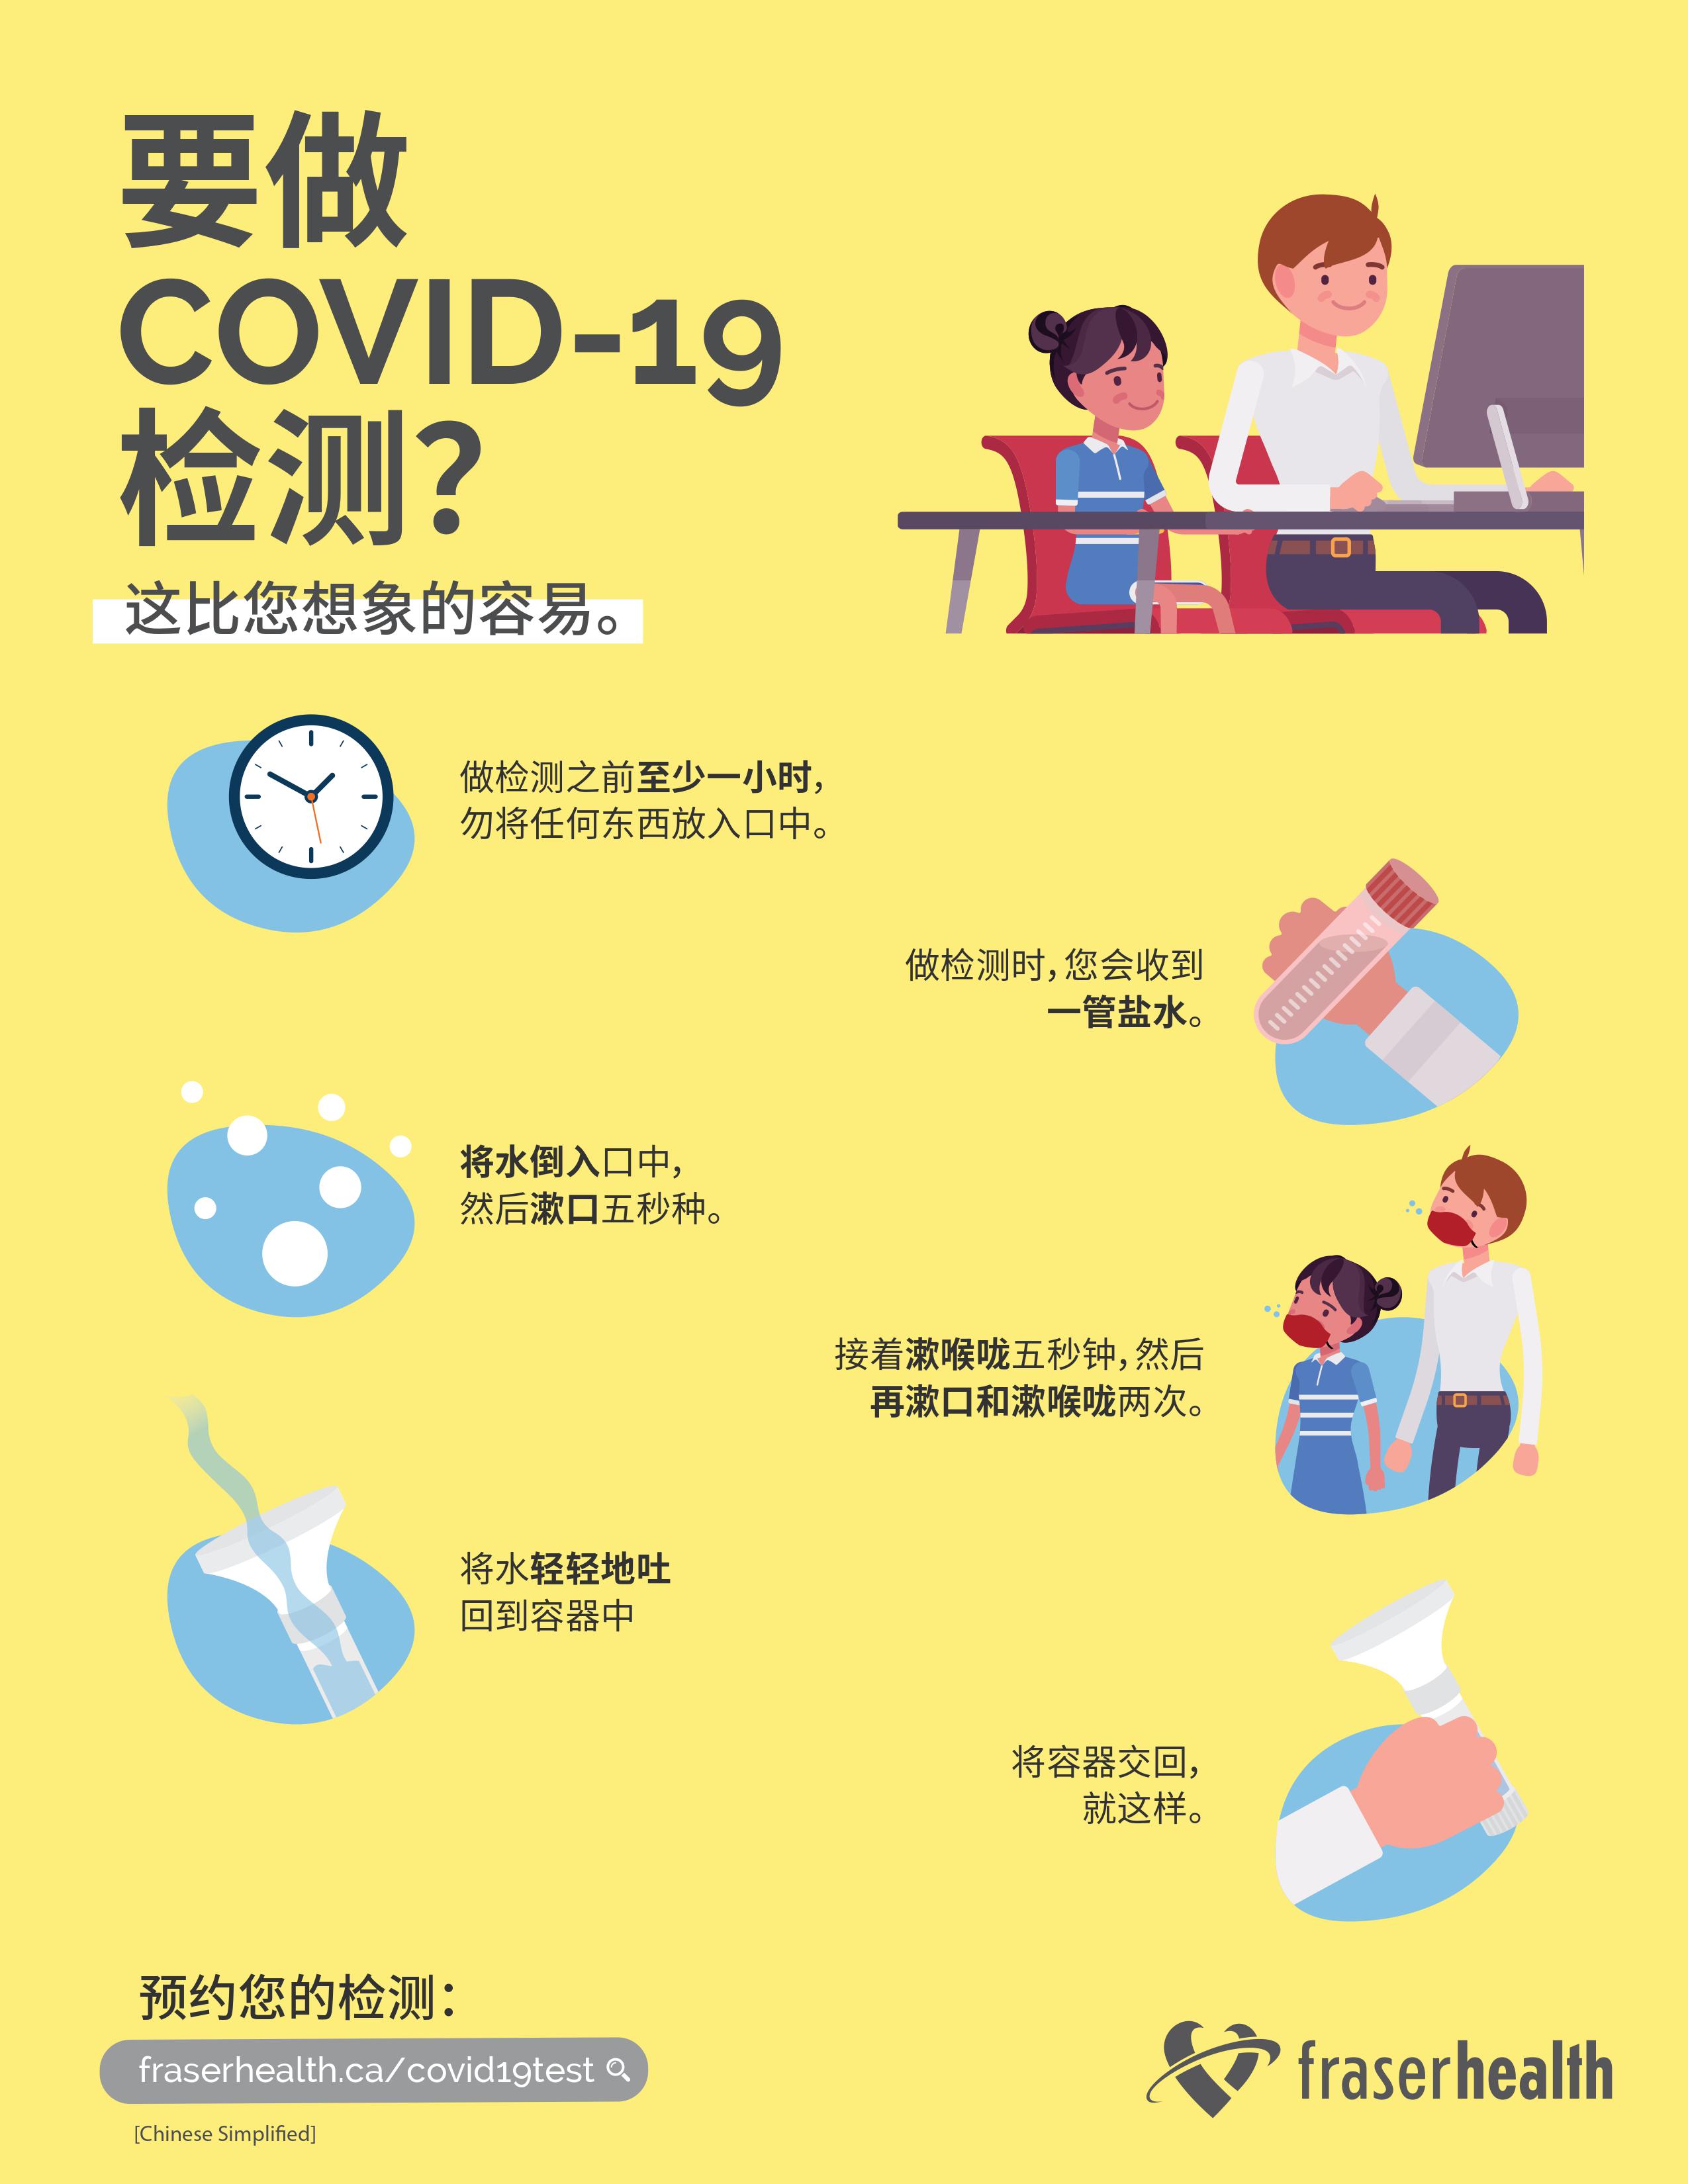 Instructions on how to prepare for your COVID-19 test in Simplified Chinese